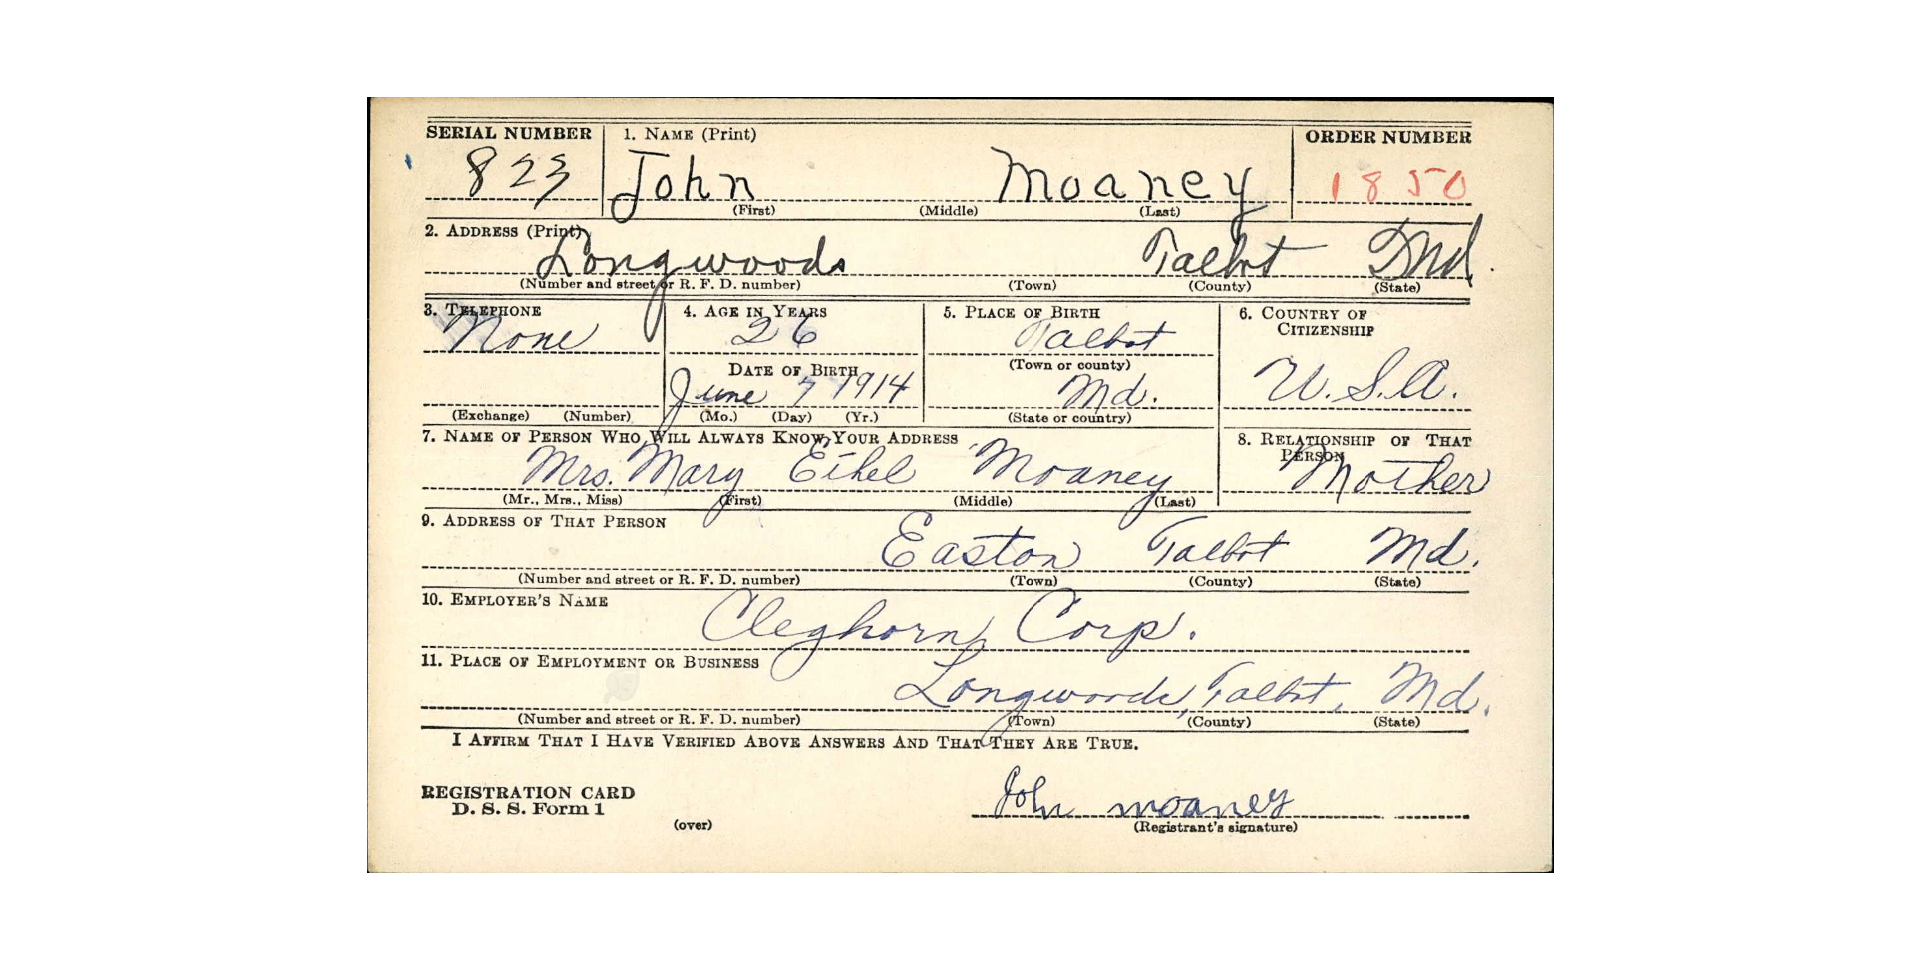 A faded yellow draft registration card of John Moaney lists some biographical information